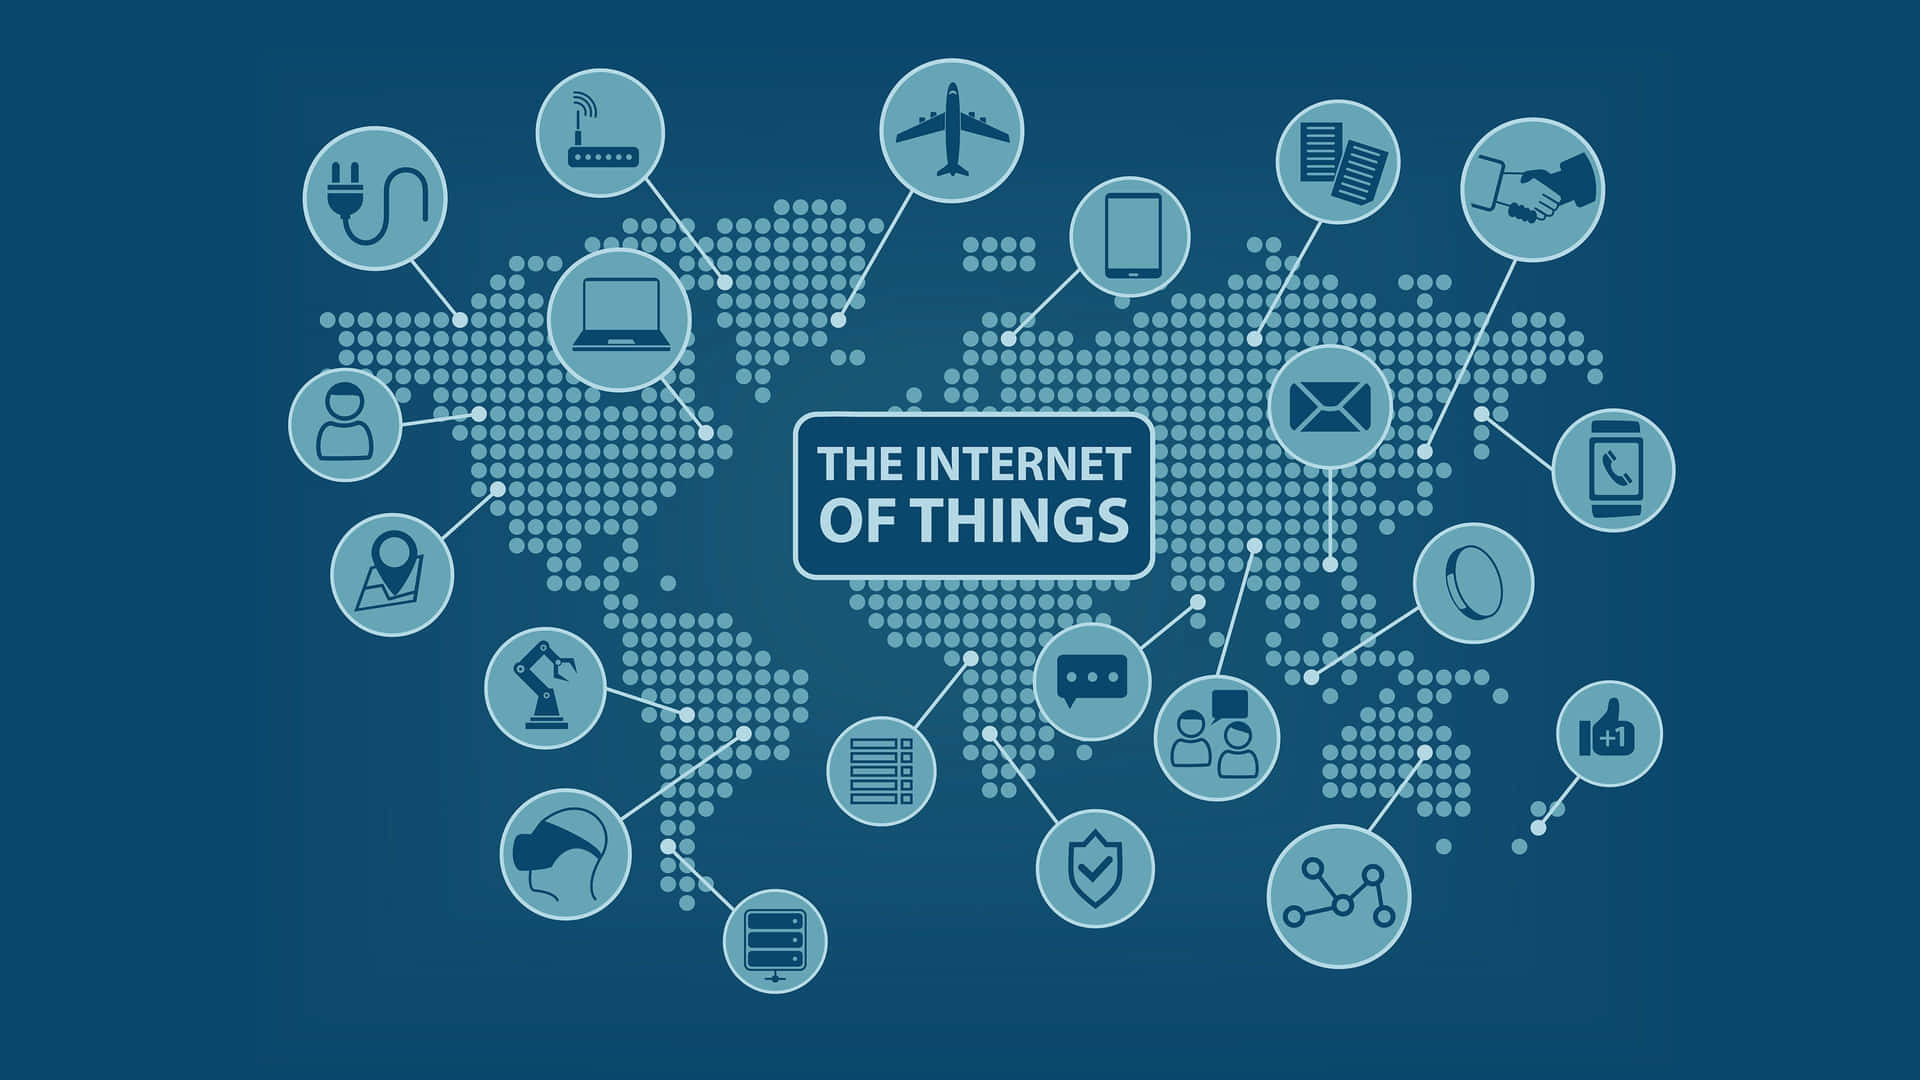 Internetof Things Concept Network Wallpaper